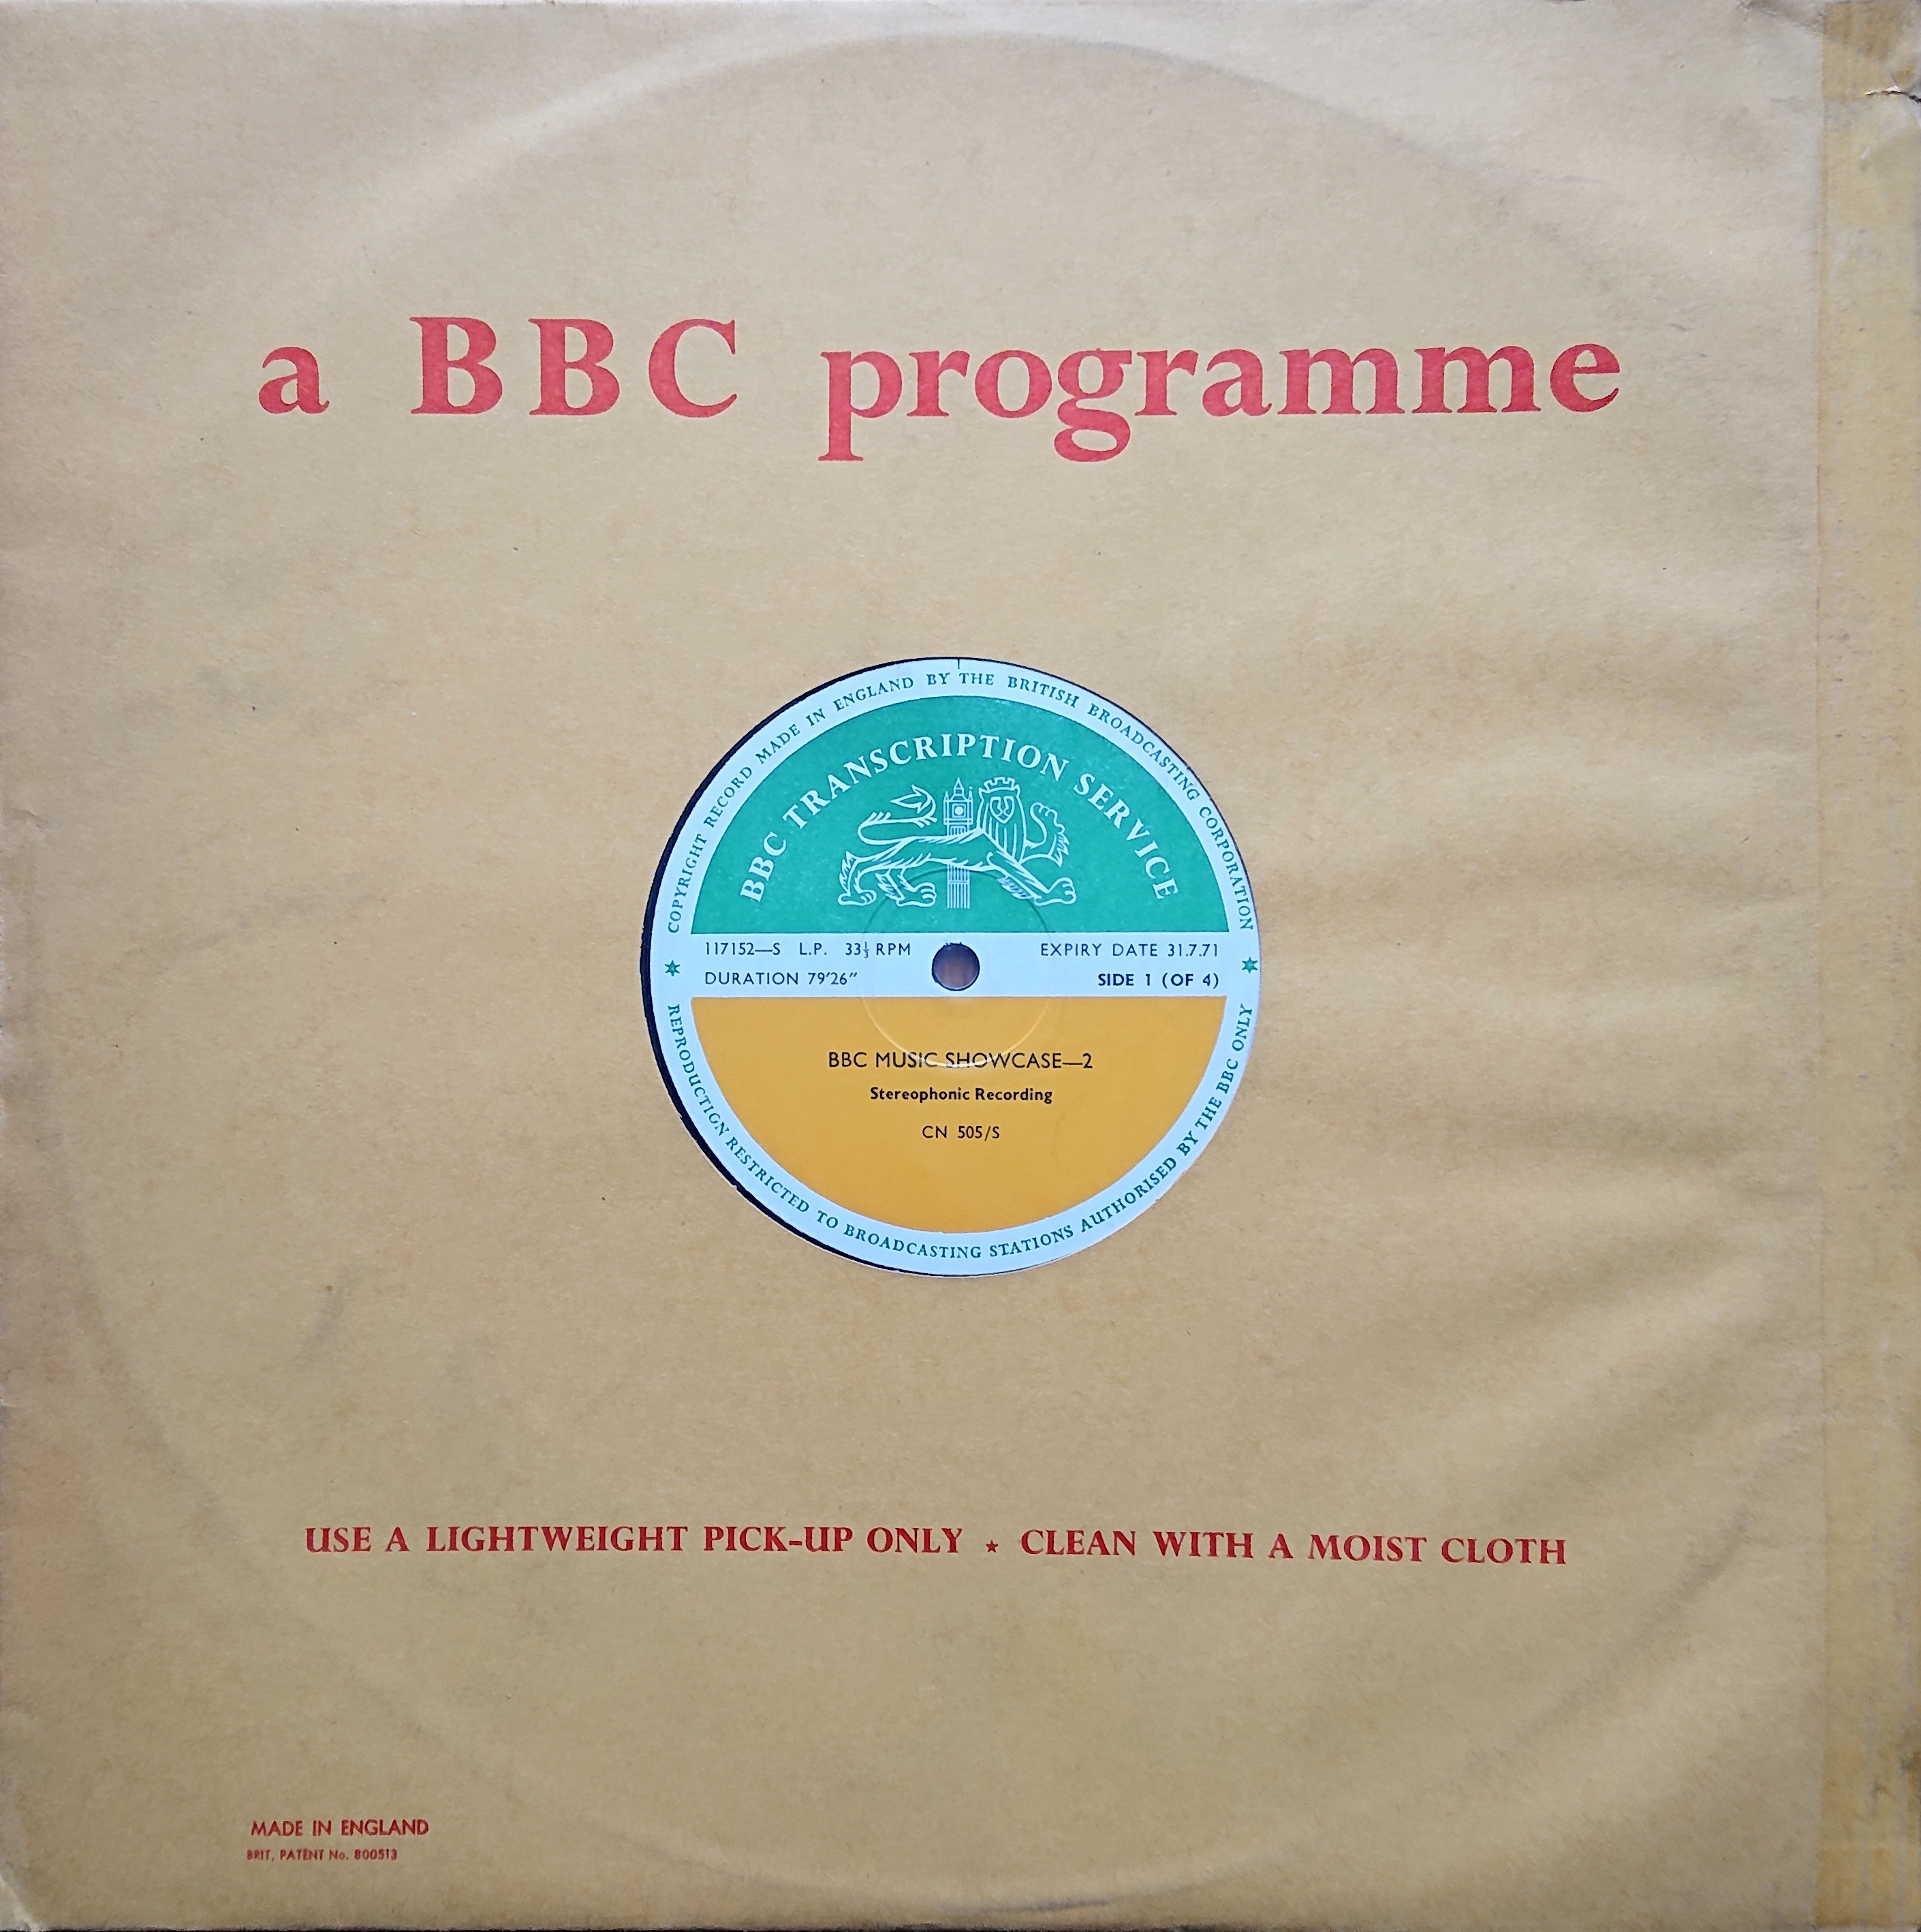 Picture of CN 505 S 03 BBC music showcase - 2 (Sides 1 & 3) by artist Various from the BBC records and Tapes library